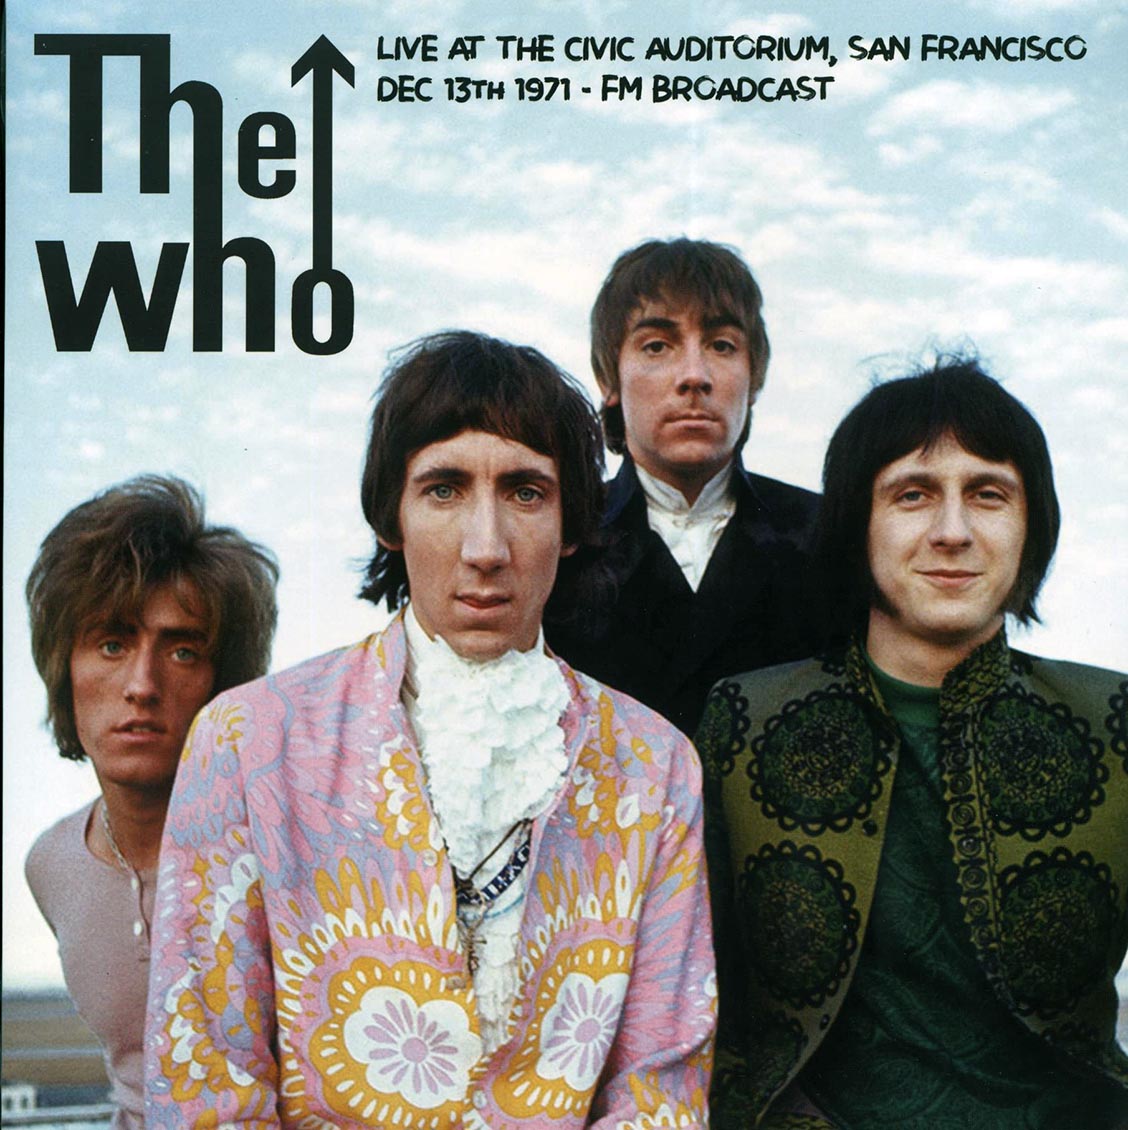 The Who - Live At The Civic Auditorium, San Francisco, Dec 13th 1971